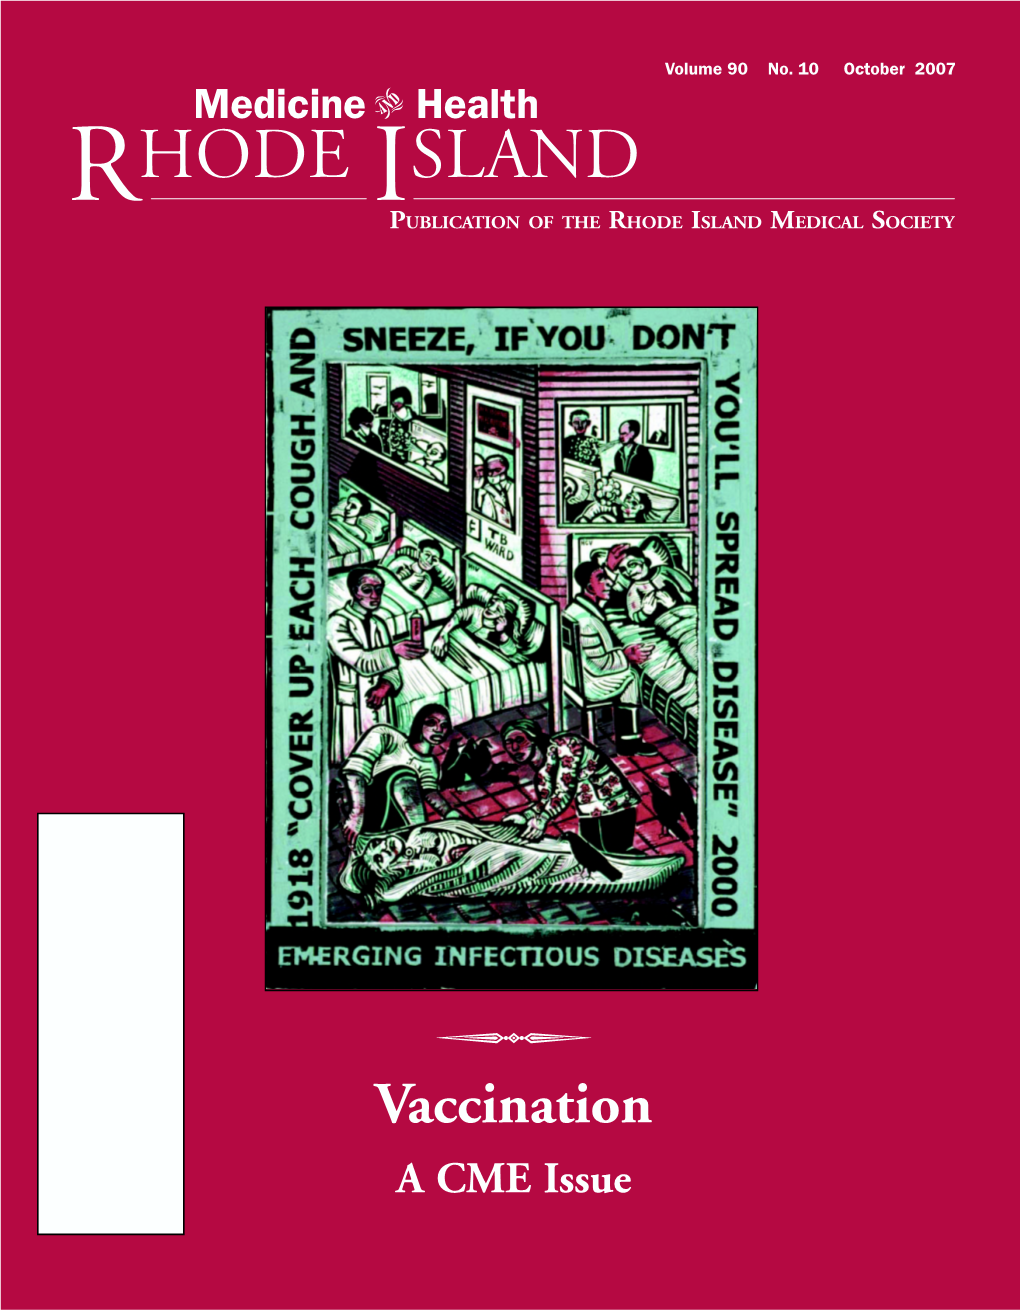 Vaccination a CME Issue